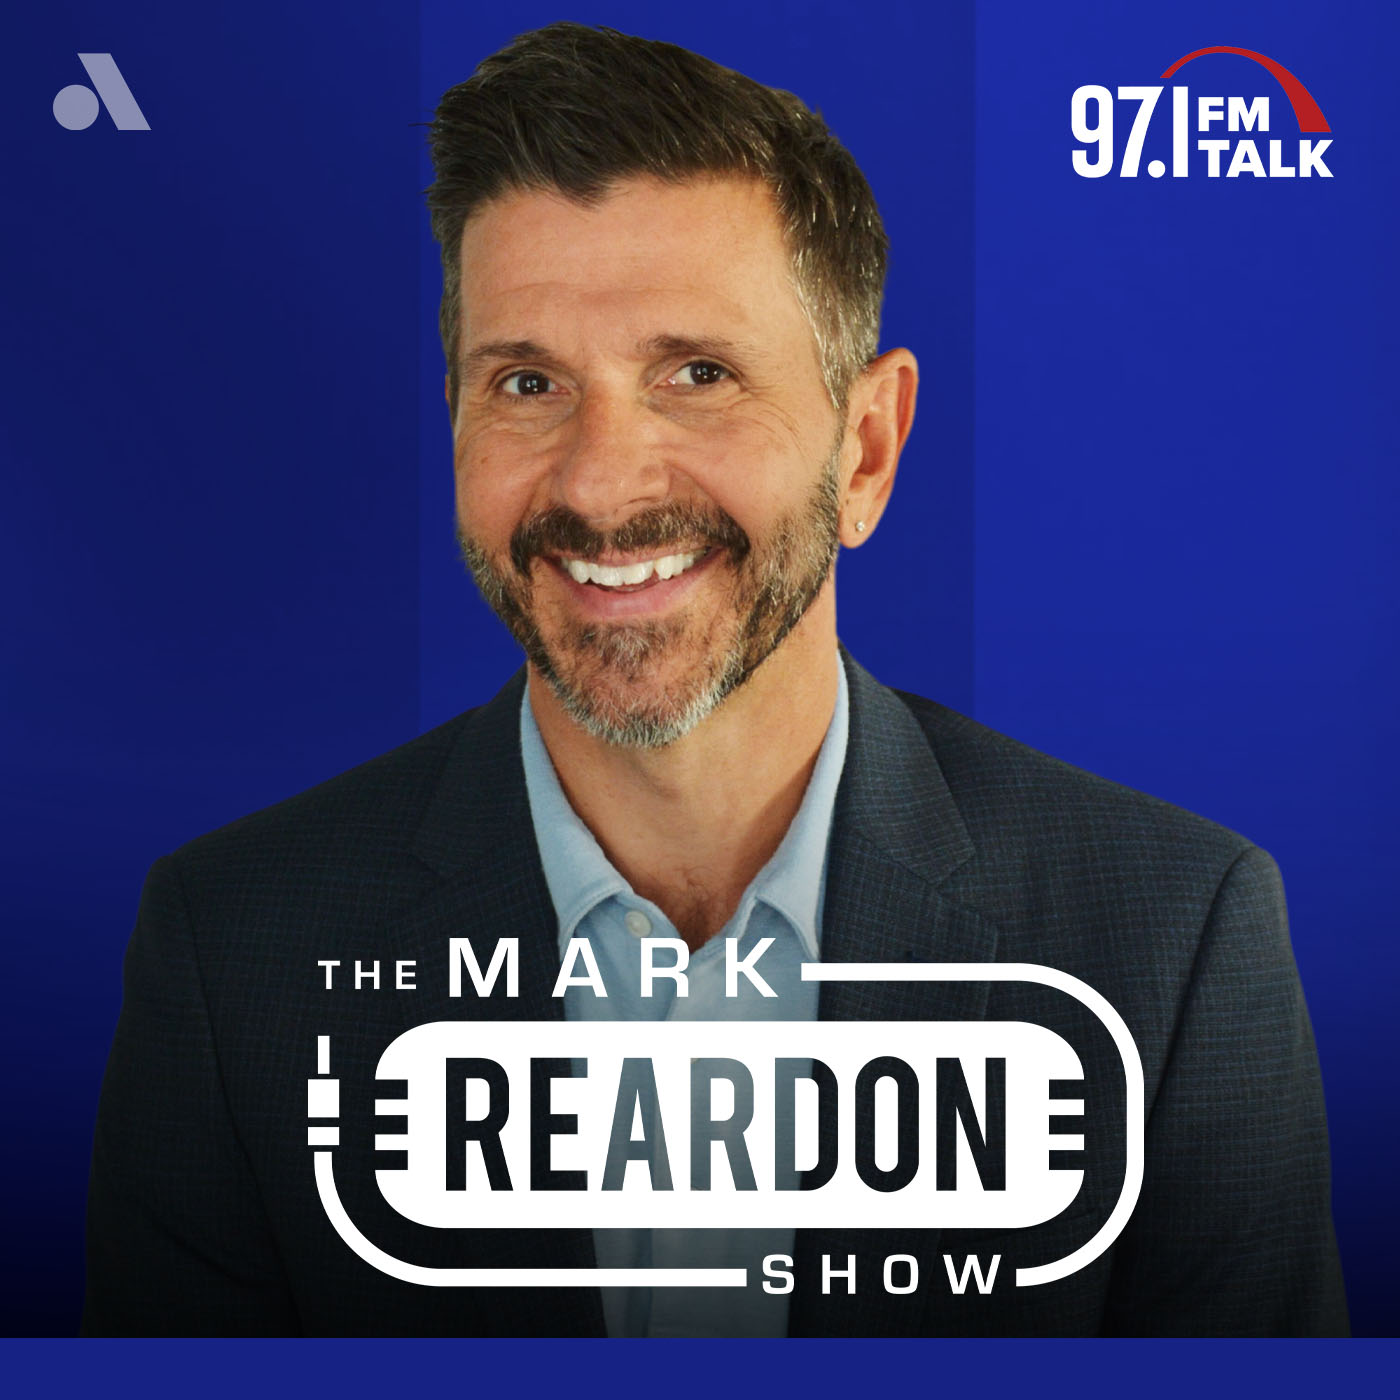 The Mark Reardon Show - October 2nd 2019 2PM Hour​